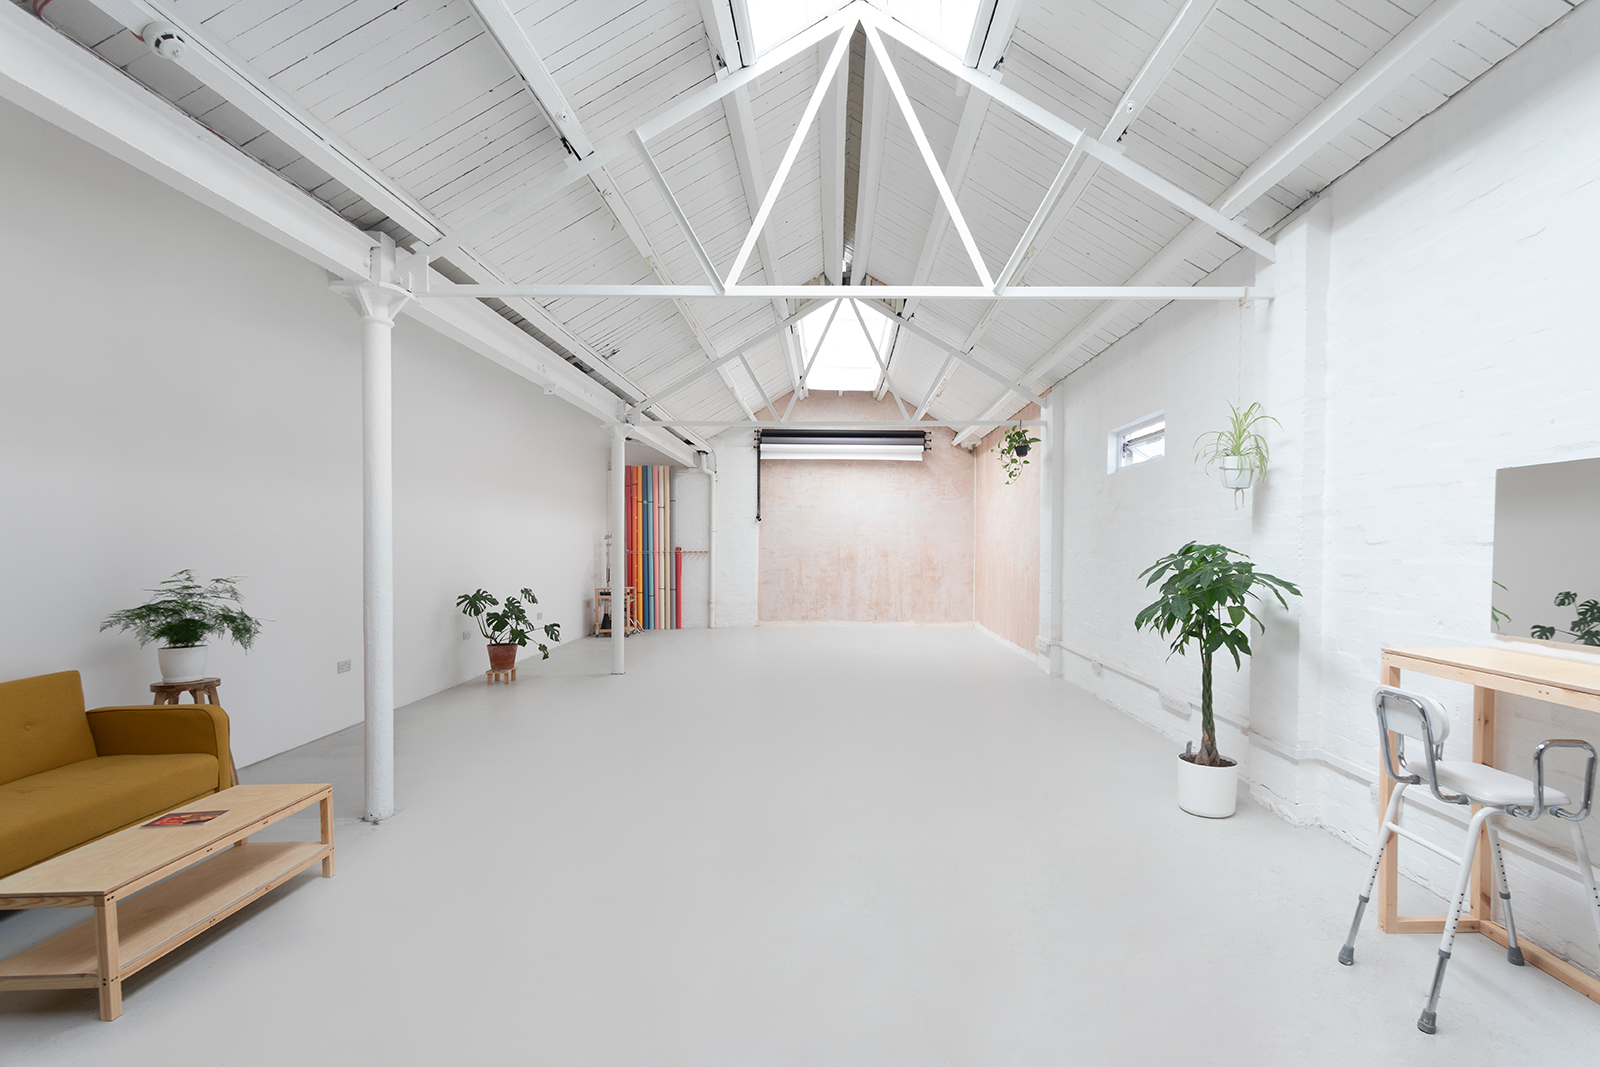 East London, London, Photography Studio, Film Studio, Hire, Rent, Rental, Photo Studio, Too Young Too Simple Studio, Photography Studio Hire, Professional, Free Equipment Included, 1200sqft, The Space